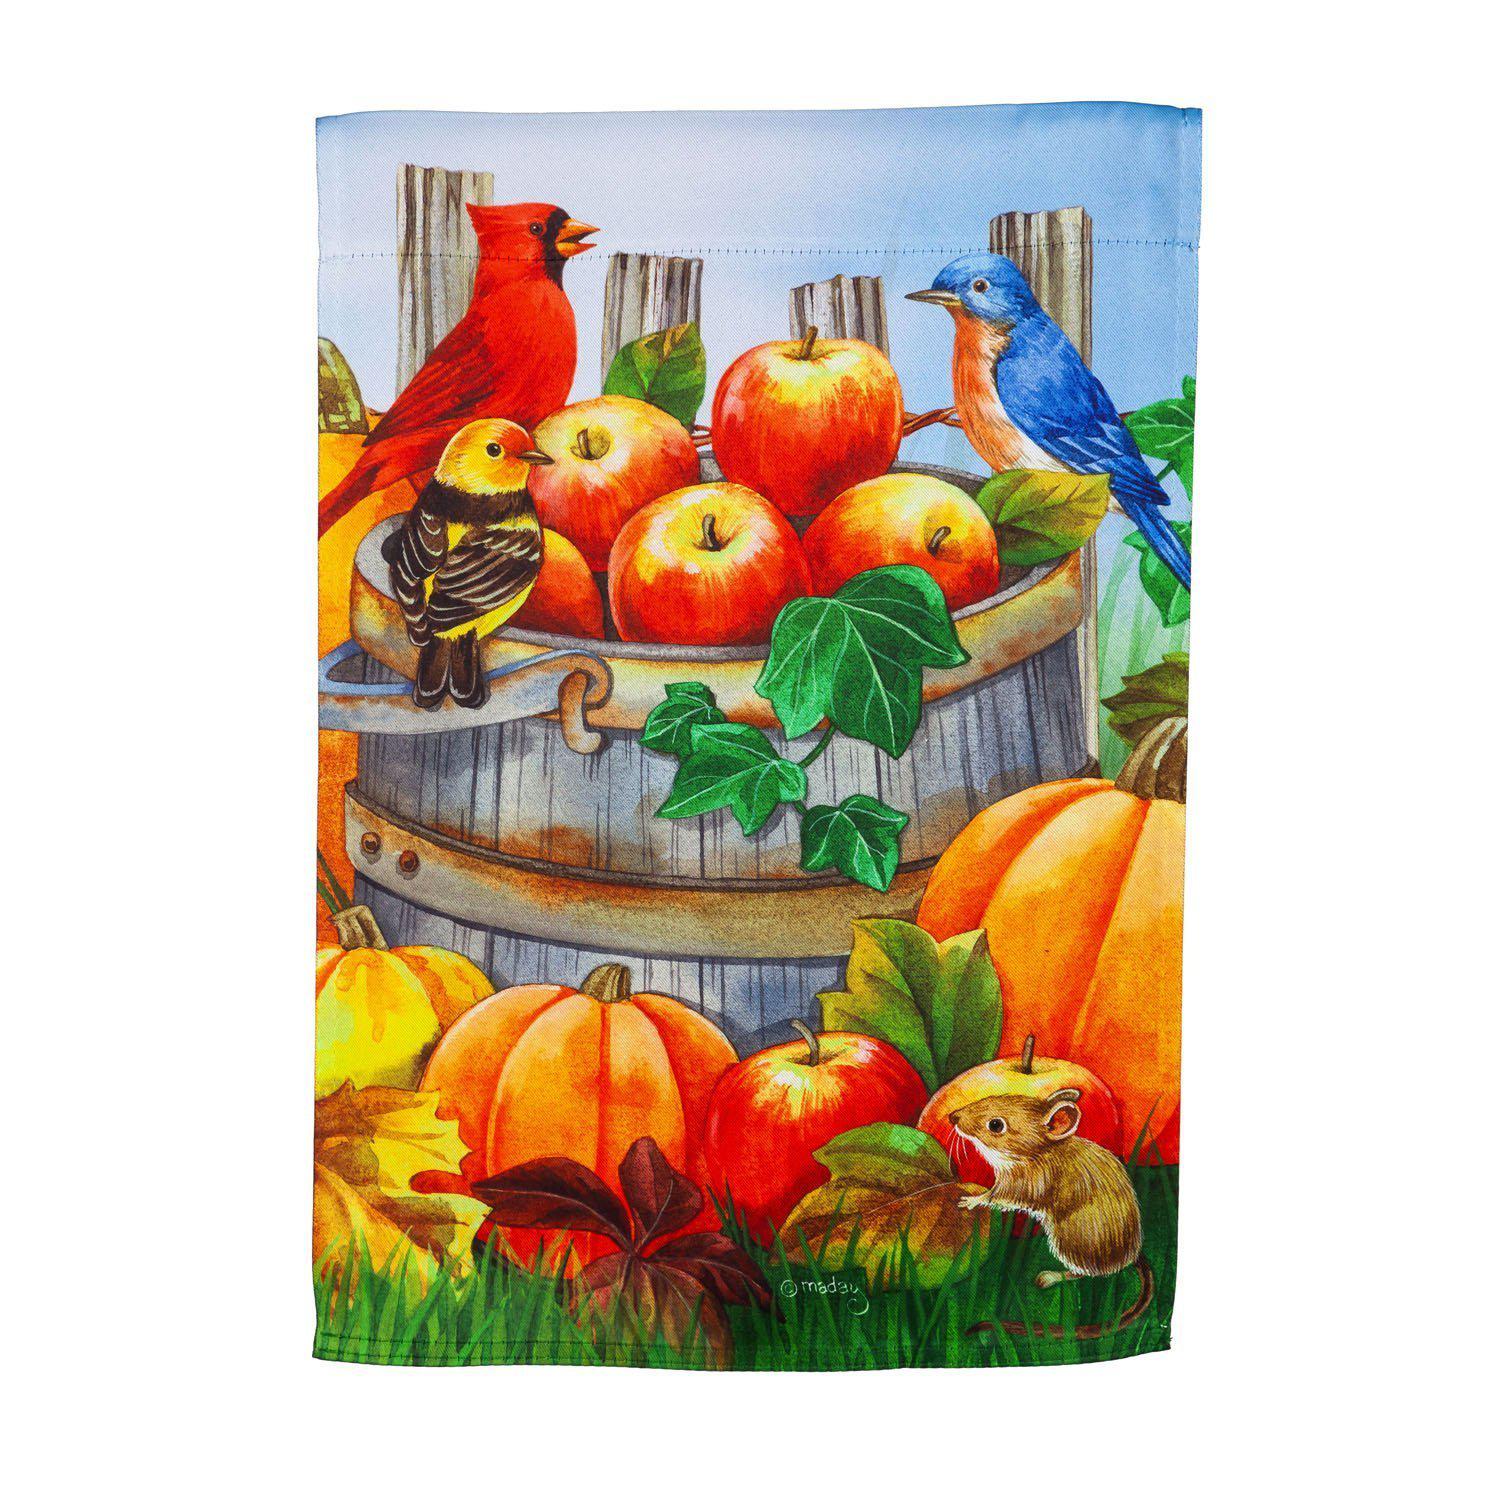 The Apples and Pumpkins house banner features a trio of birds on a basket of apples surrounded by pumpkins.